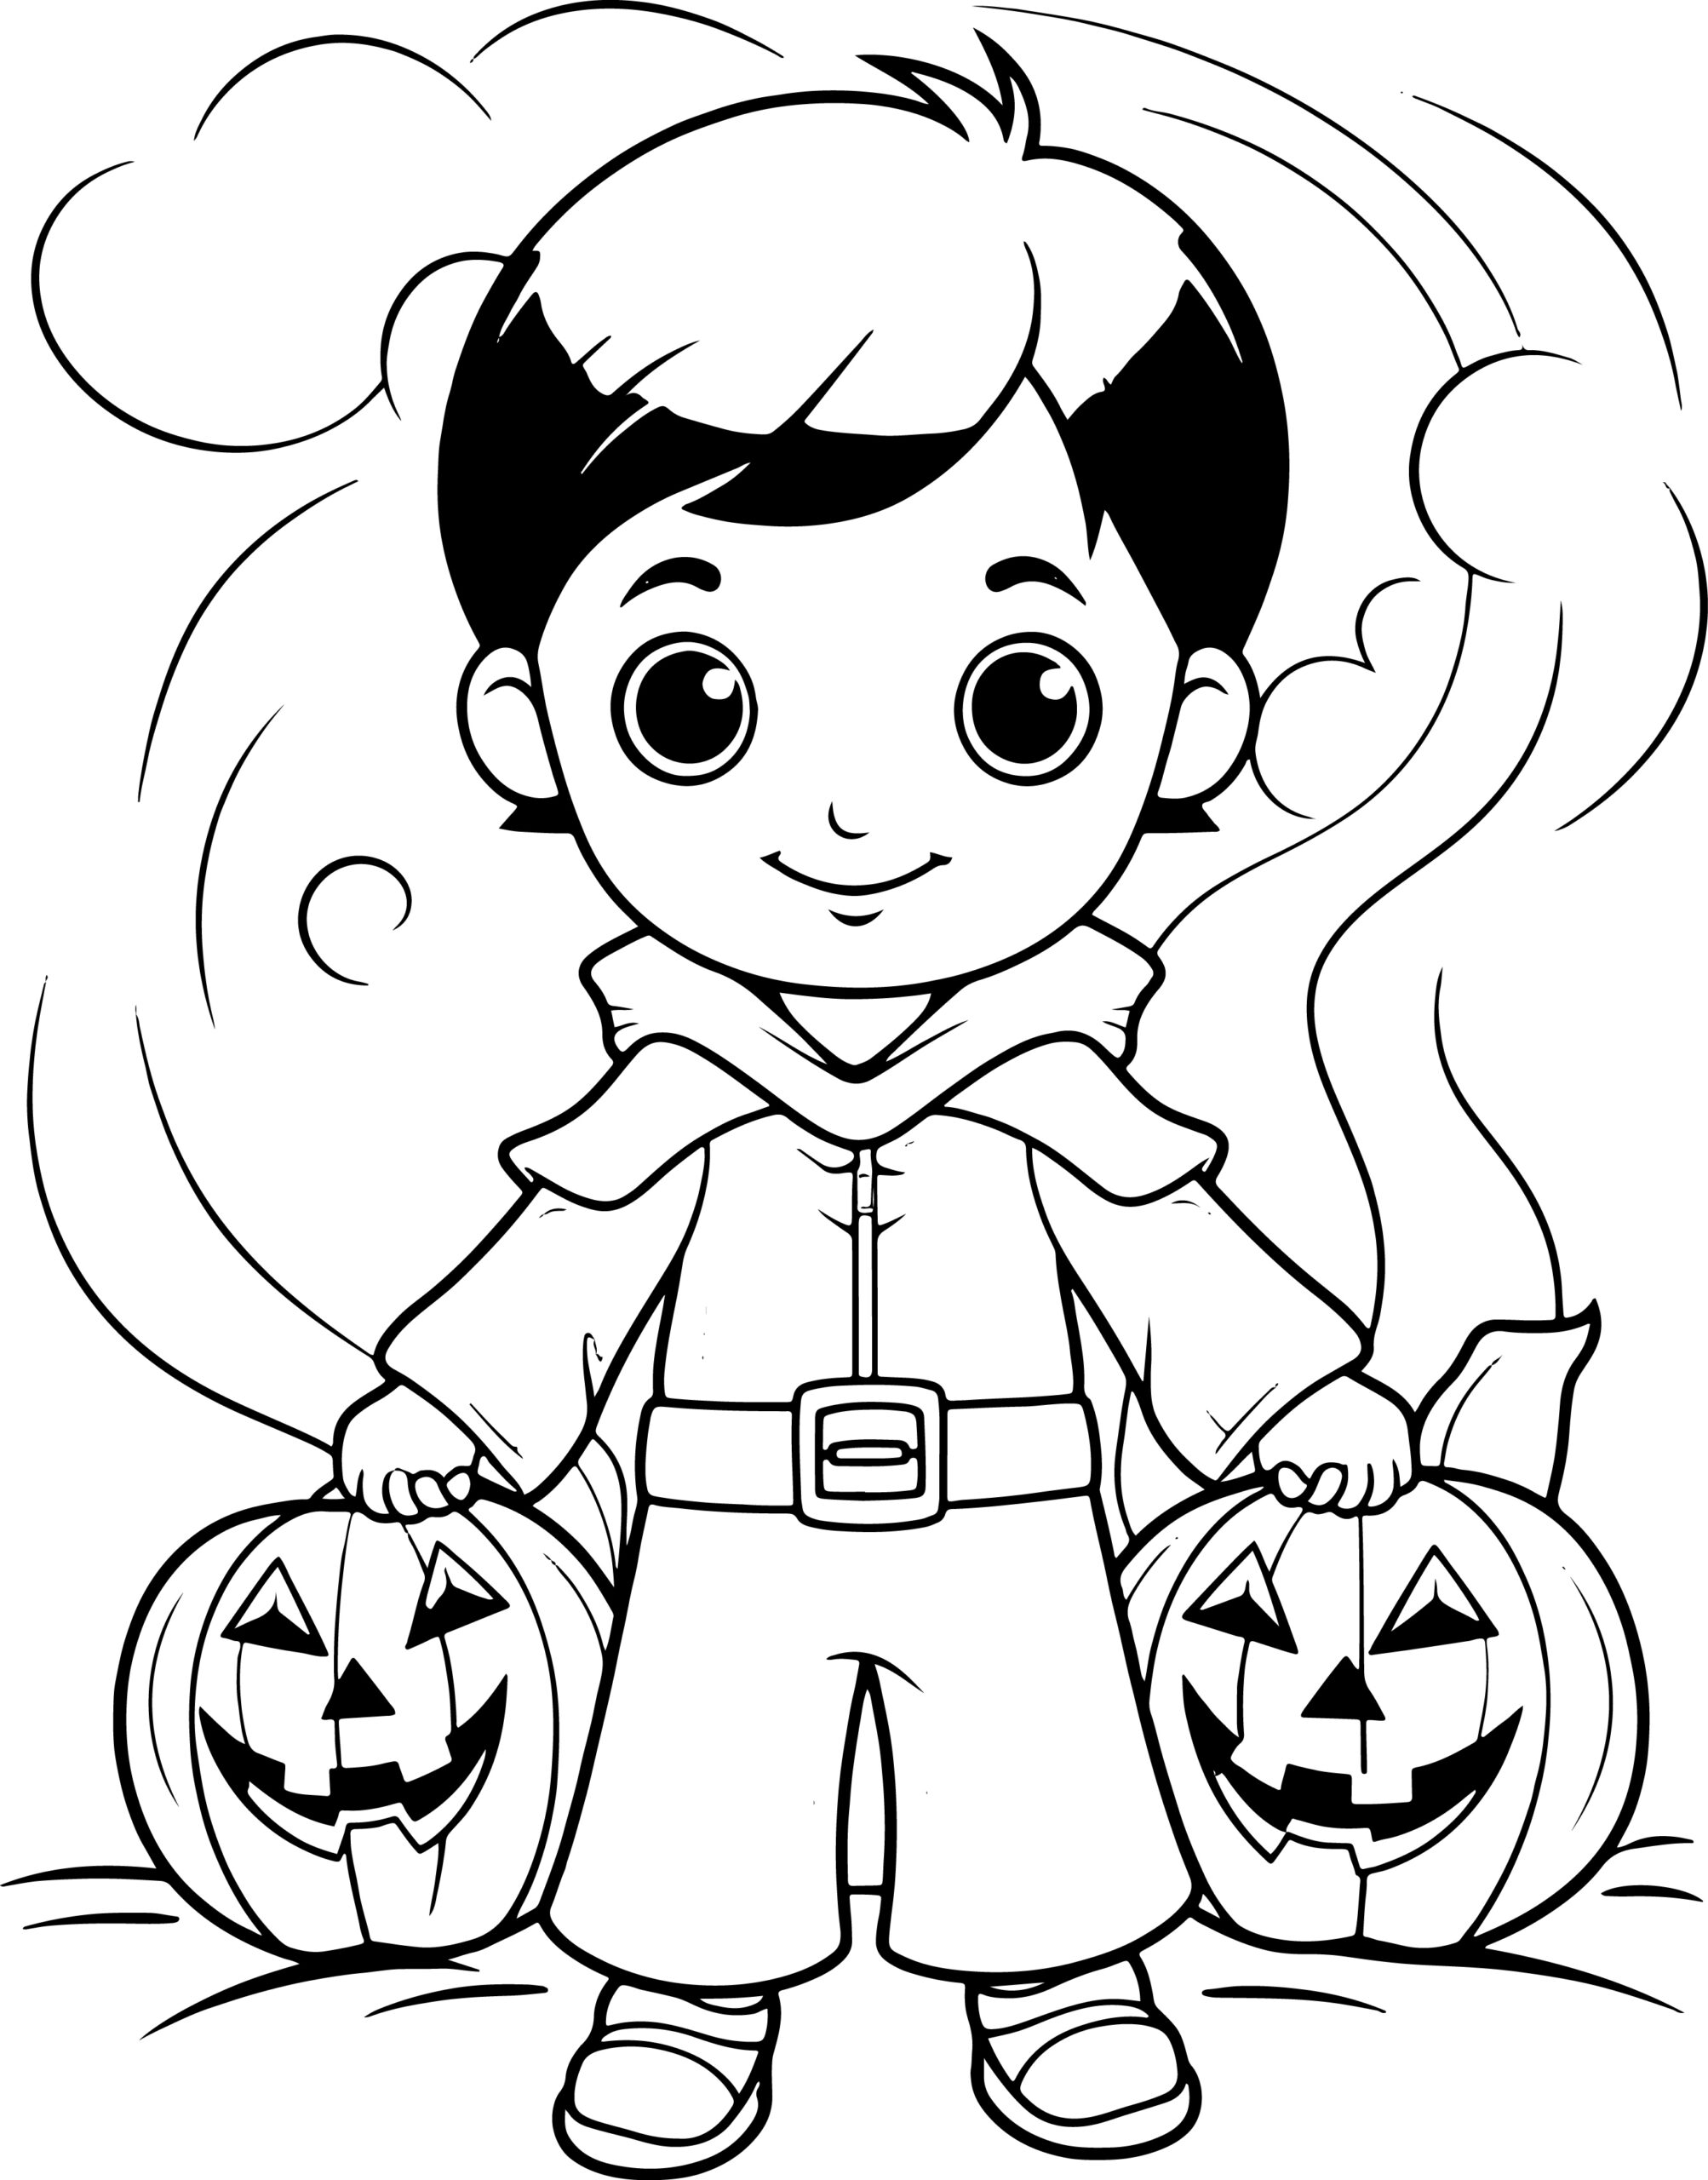 Trick or treat happy halloween coloring book